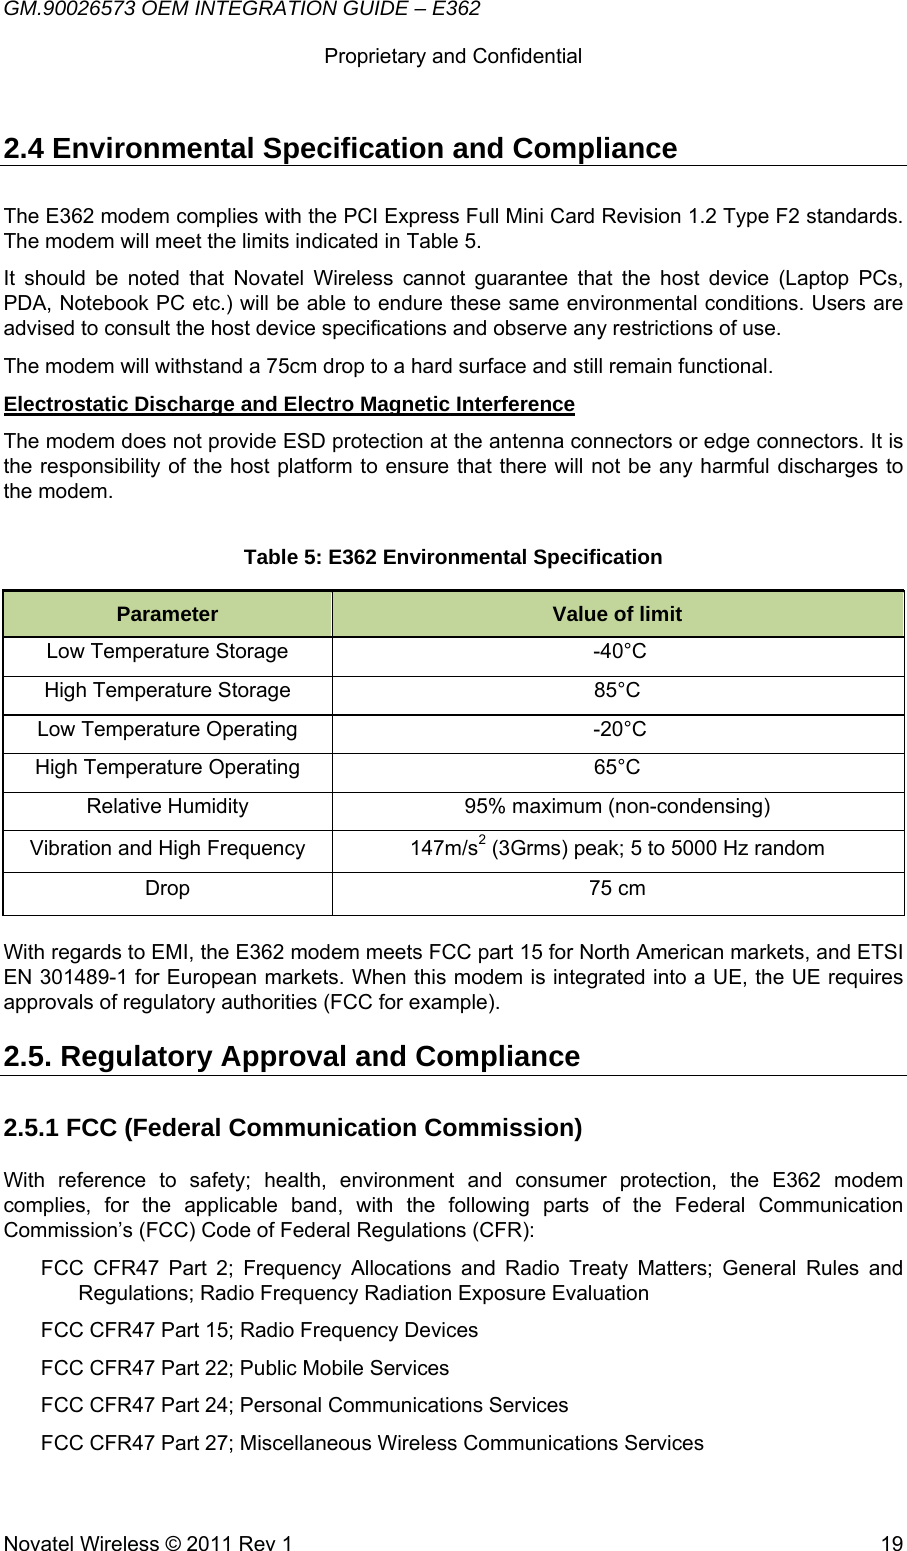 GM.90026573 OEM INTEGRATION GUIDE – E362      Proprietary and Confidential   Novatel Wireless © 2011 Rev 1  192.4 Environmental Specification and Compliance The E362 modem complies with the PCI Express Full Mini Card Revision 1.2 Type F2 standards. The modem will meet the limits indicated in Table 5. It should be noted that Novatel Wireless cannot guarantee that the host device (Laptop PCs, PDA, Notebook PC etc.) will be able to endure these same environmental conditions. Users are advised to consult the host device specifications and observe any restrictions of use. The modem will withstand a 75cm drop to a hard surface and still remain functional. Electrostatic Discharge and Electro Magnetic Interference The modem does not provide ESD protection at the antenna connectors or edge connectors. It is the responsibility of the host platform to ensure that there will not be any harmful discharges to the modem. Table 5: E362 Environmental Specification Parameter  Value of limit Low Temperature Storage   -40°C High Temperature Storage  85°C Low Temperature Operating   -20°C High Temperature Operating  65°C Relative Humidity  95% maximum (non-condensing) Vibration and High Frequency  147m/s2 (3Grms) peak; 5 to 5000 Hz random Drop 75 cm  With regards to EMI, the E362 modem meets FCC part 15 for North American markets, and ETSI EN 301489-1 for European markets. When this modem is integrated into a UE, the UE requires approvals of regulatory authorities (FCC for example). 2.5. Regulatory Approval and Compliance 2.5.1 FCC (Federal Communication Commission) With reference to safety; health, environment and consumer protection, the E362 modem complies, for the applicable band, with the following parts of the Federal Communication Commission’s (FCC) Code of Federal Regulations (CFR): FCC CFR47 Part 2; Frequency Allocations and Radio Treaty Matters; General Rules and Regulations; Radio Frequency Radiation Exposure Evaluation FCC CFR47 Part 15; Radio Frequency Devices FCC CFR47 Part 22; Public Mobile Services FCC CFR47 Part 24; Personal Communications Services FCC CFR47 Part 27; Miscellaneous Wireless Communications Services 